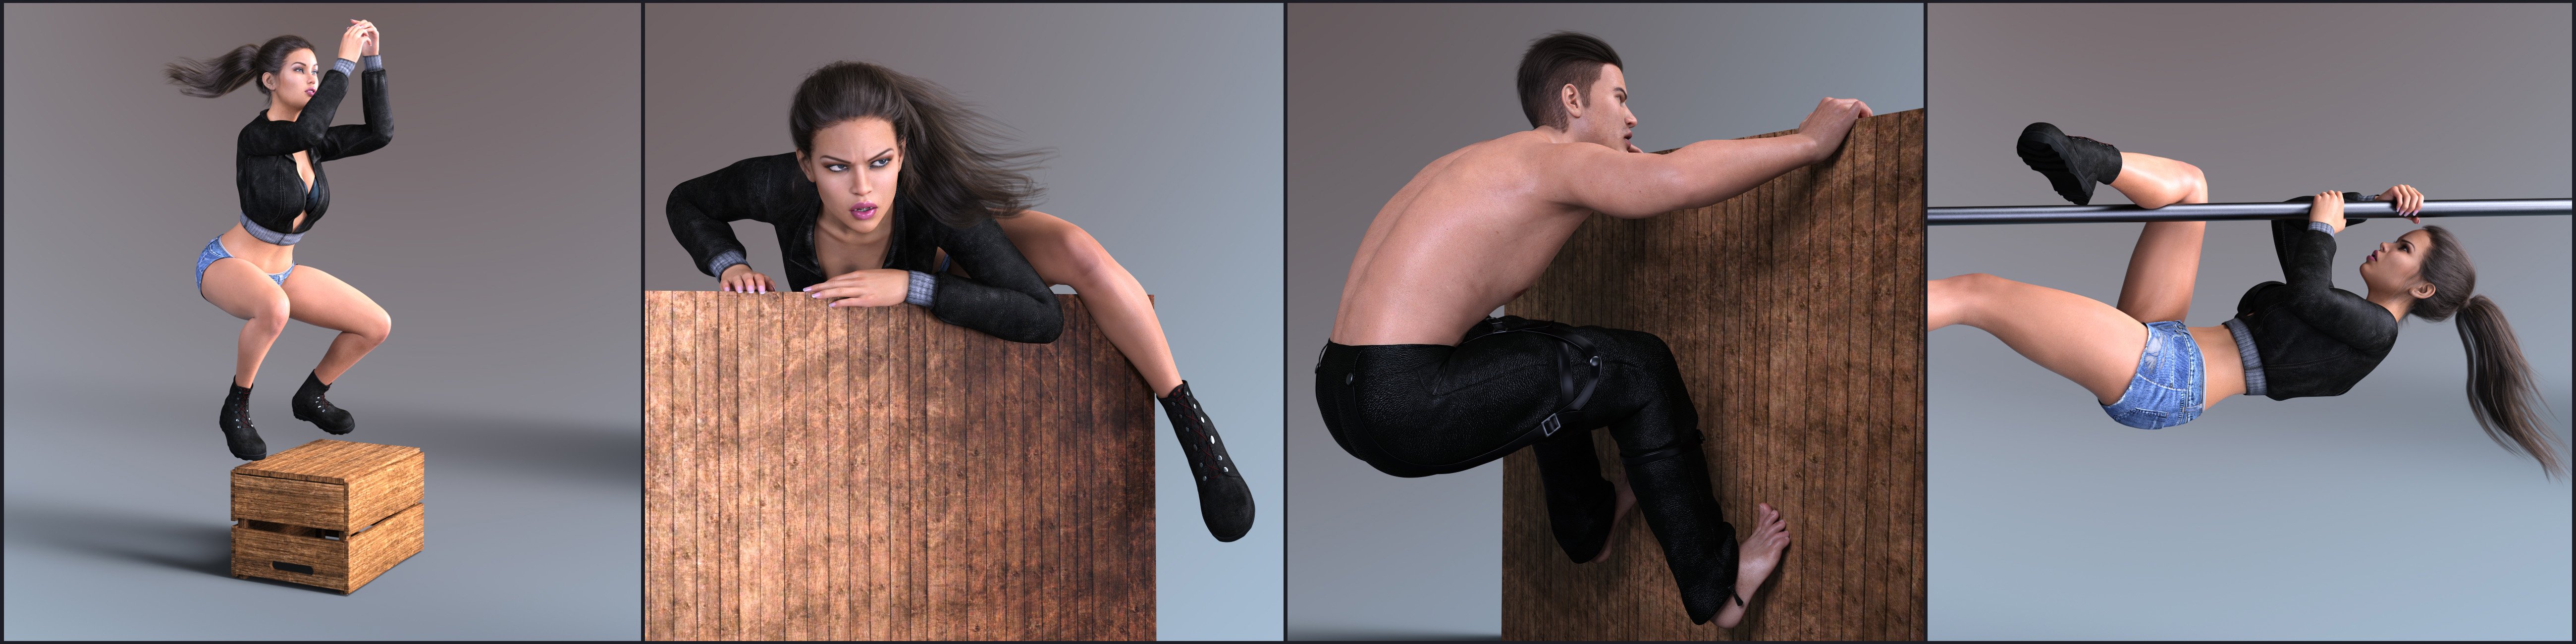 Z Variety Action Pose Collection for Genesis 3 and 8 by: Zeddicuss, 3D Models by Daz 3D